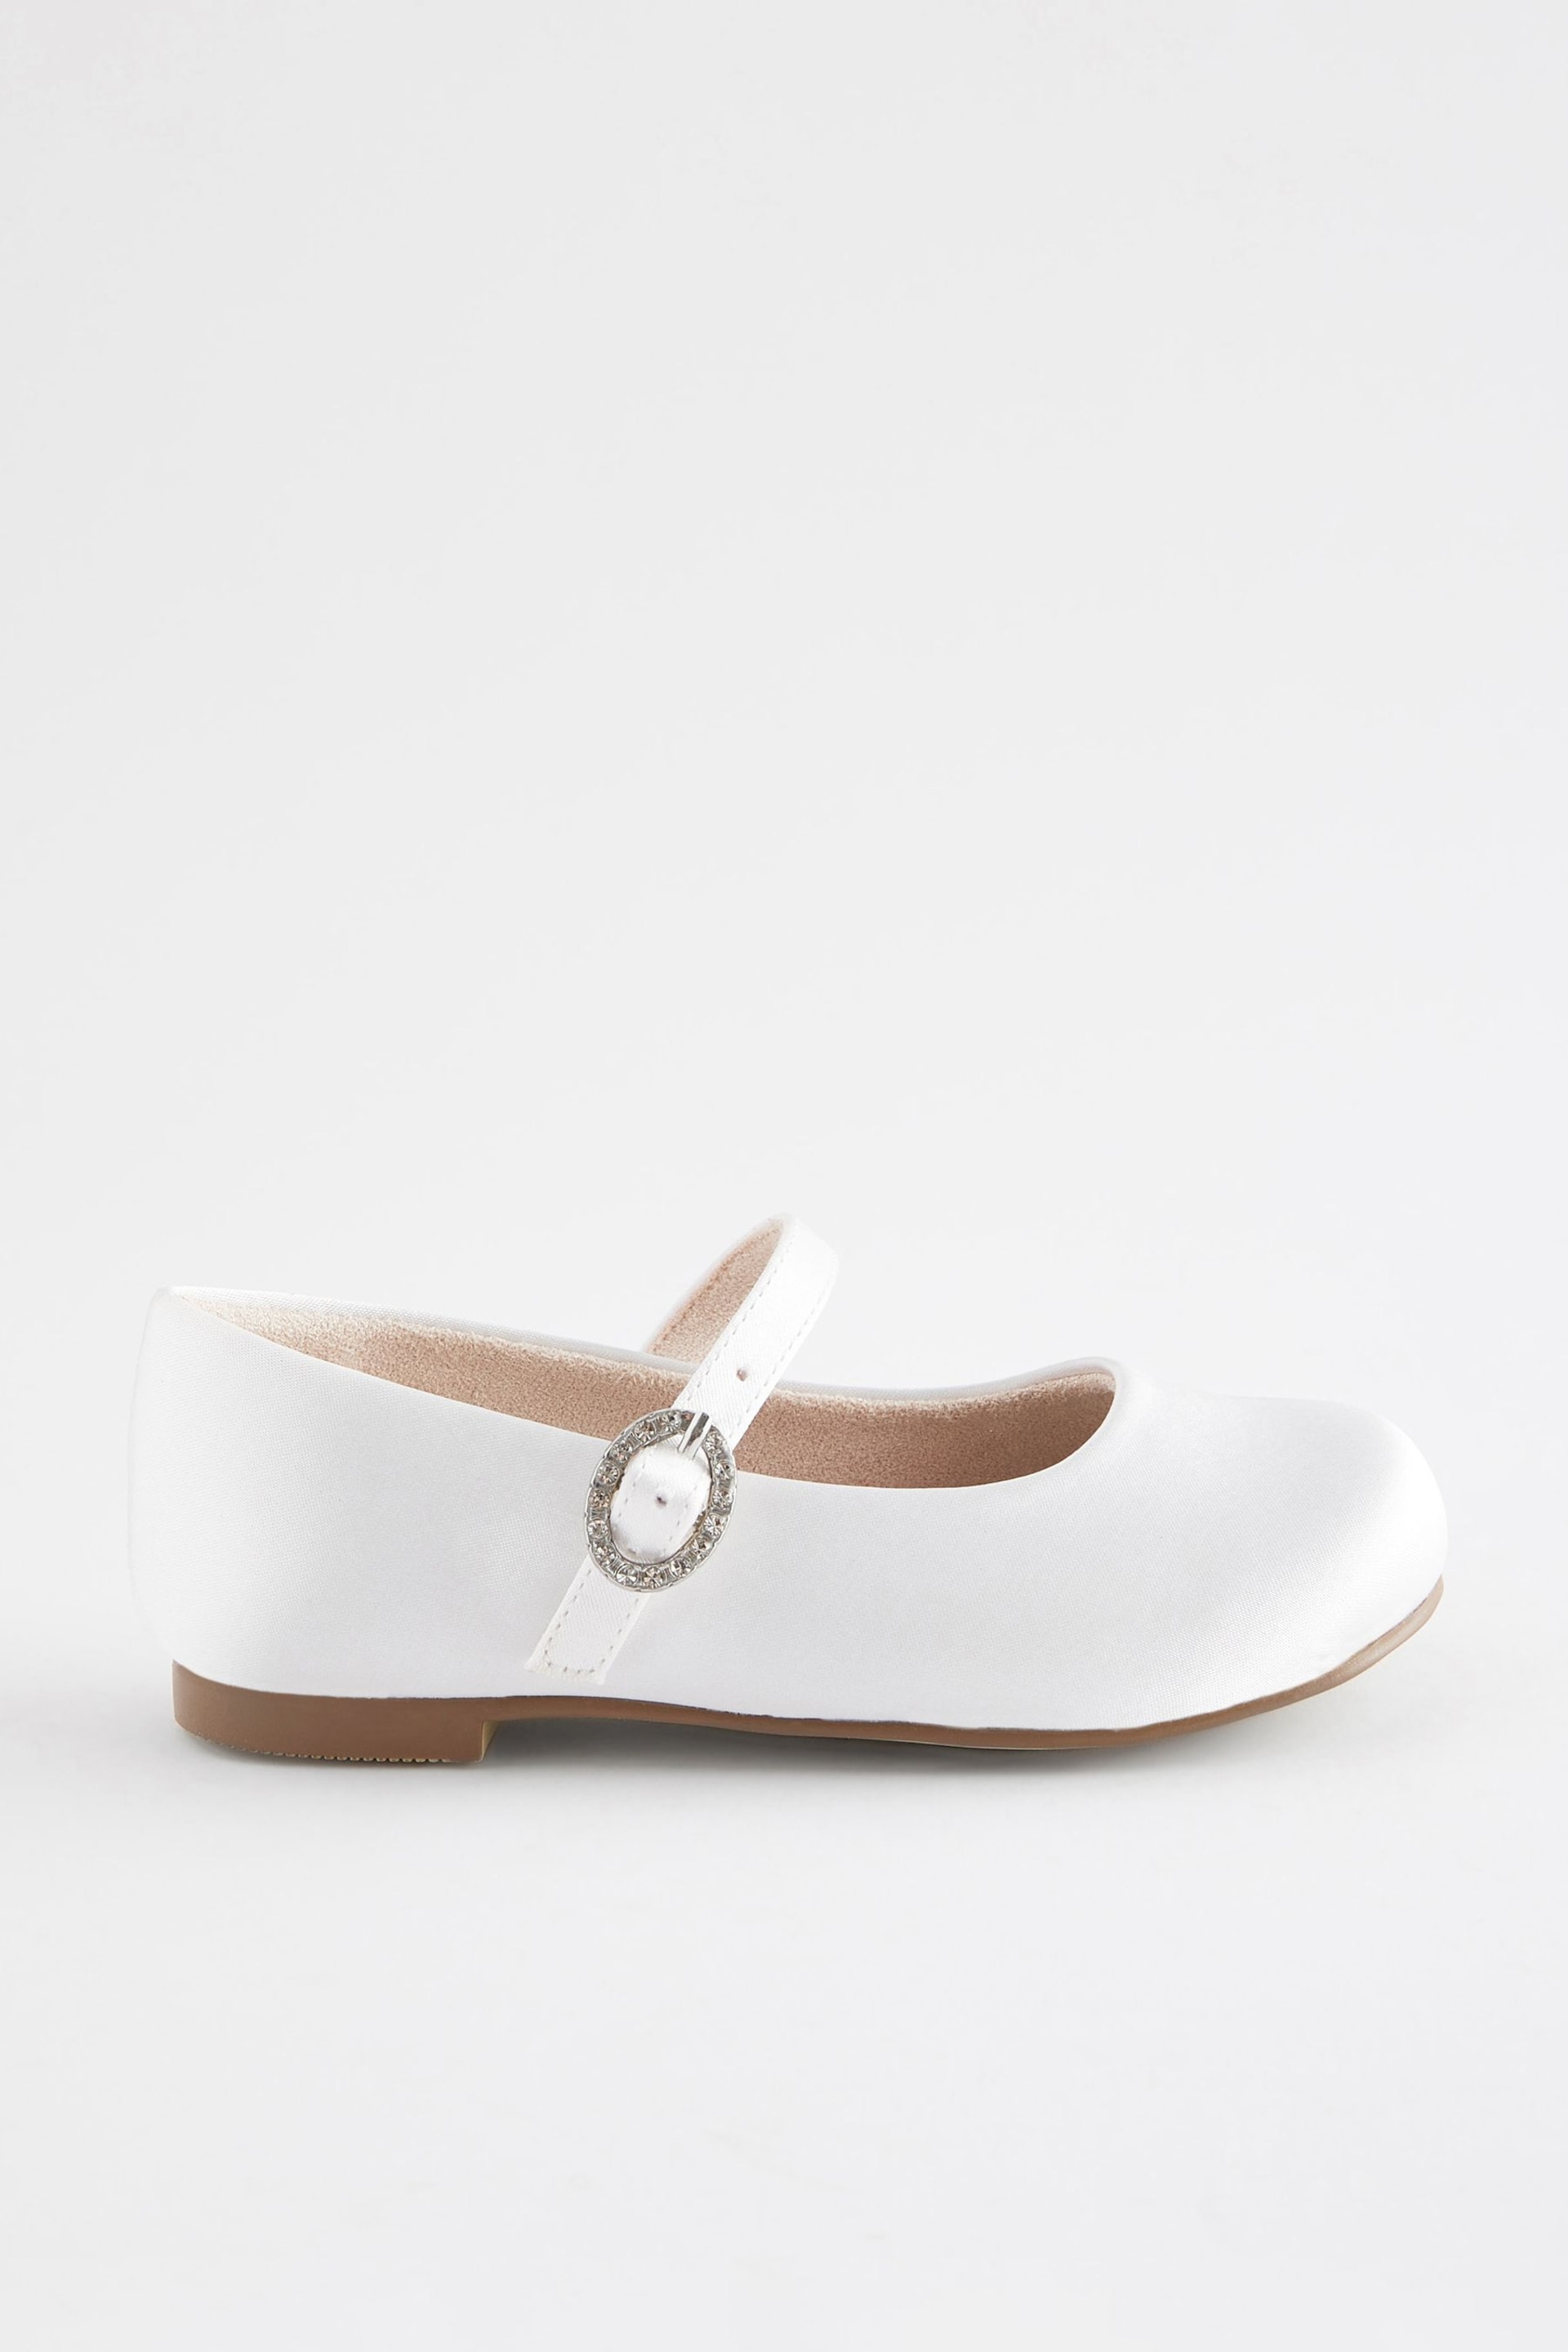 White Wide Fit (G) Bridesmaid Occasion Mary Jane Shoes - Image 2 of 5